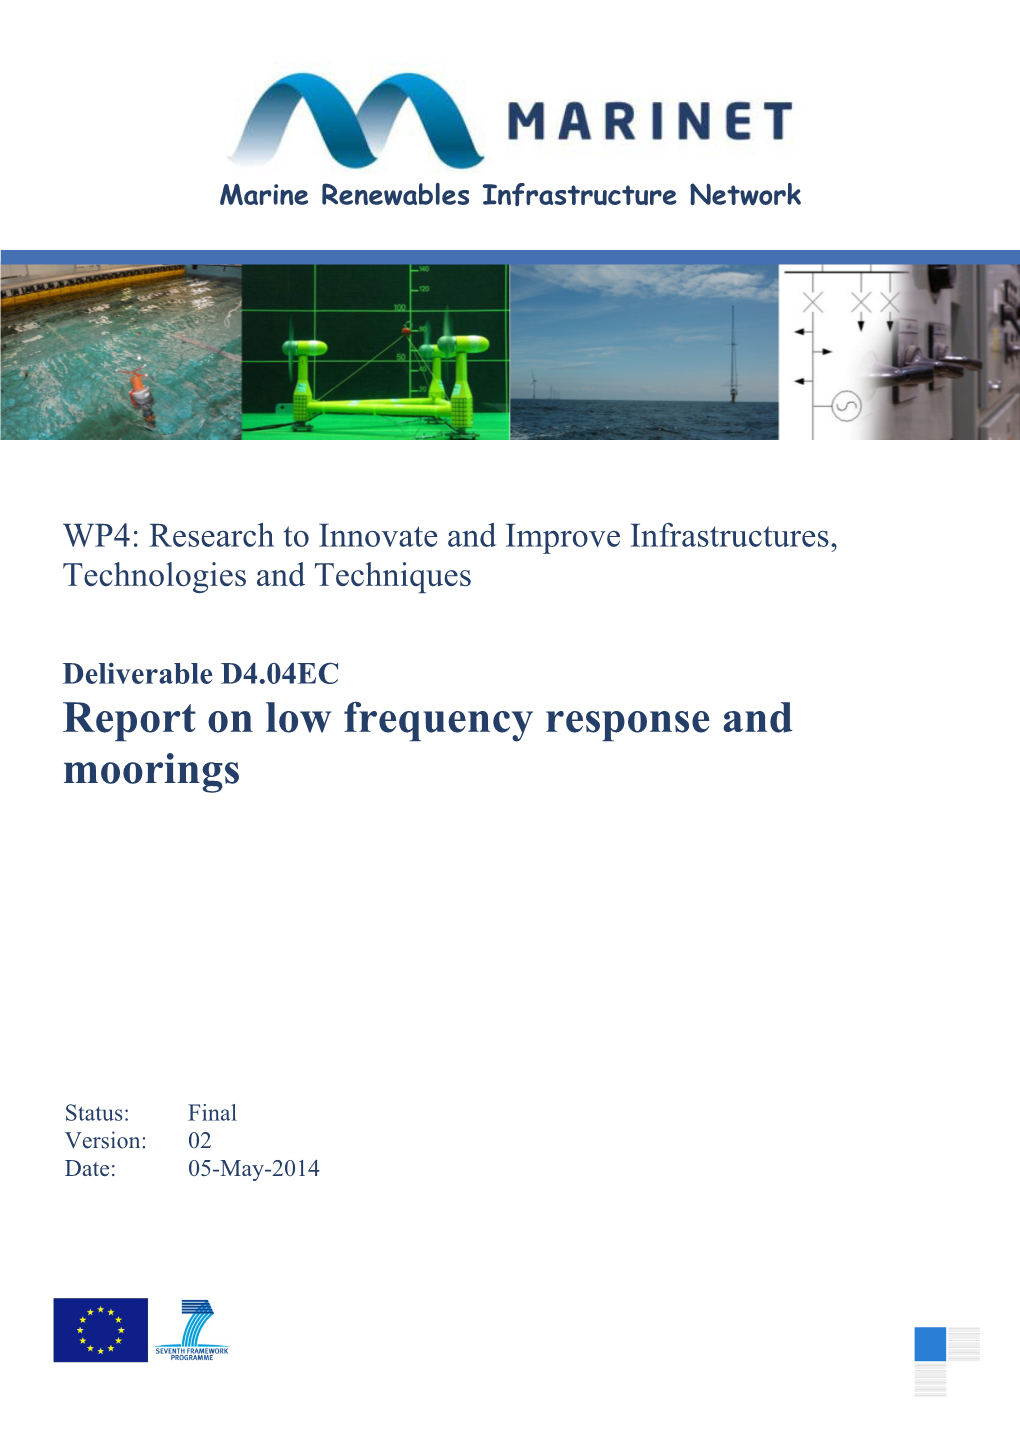 D4.04 Report on Low Frequency Response and Moorings